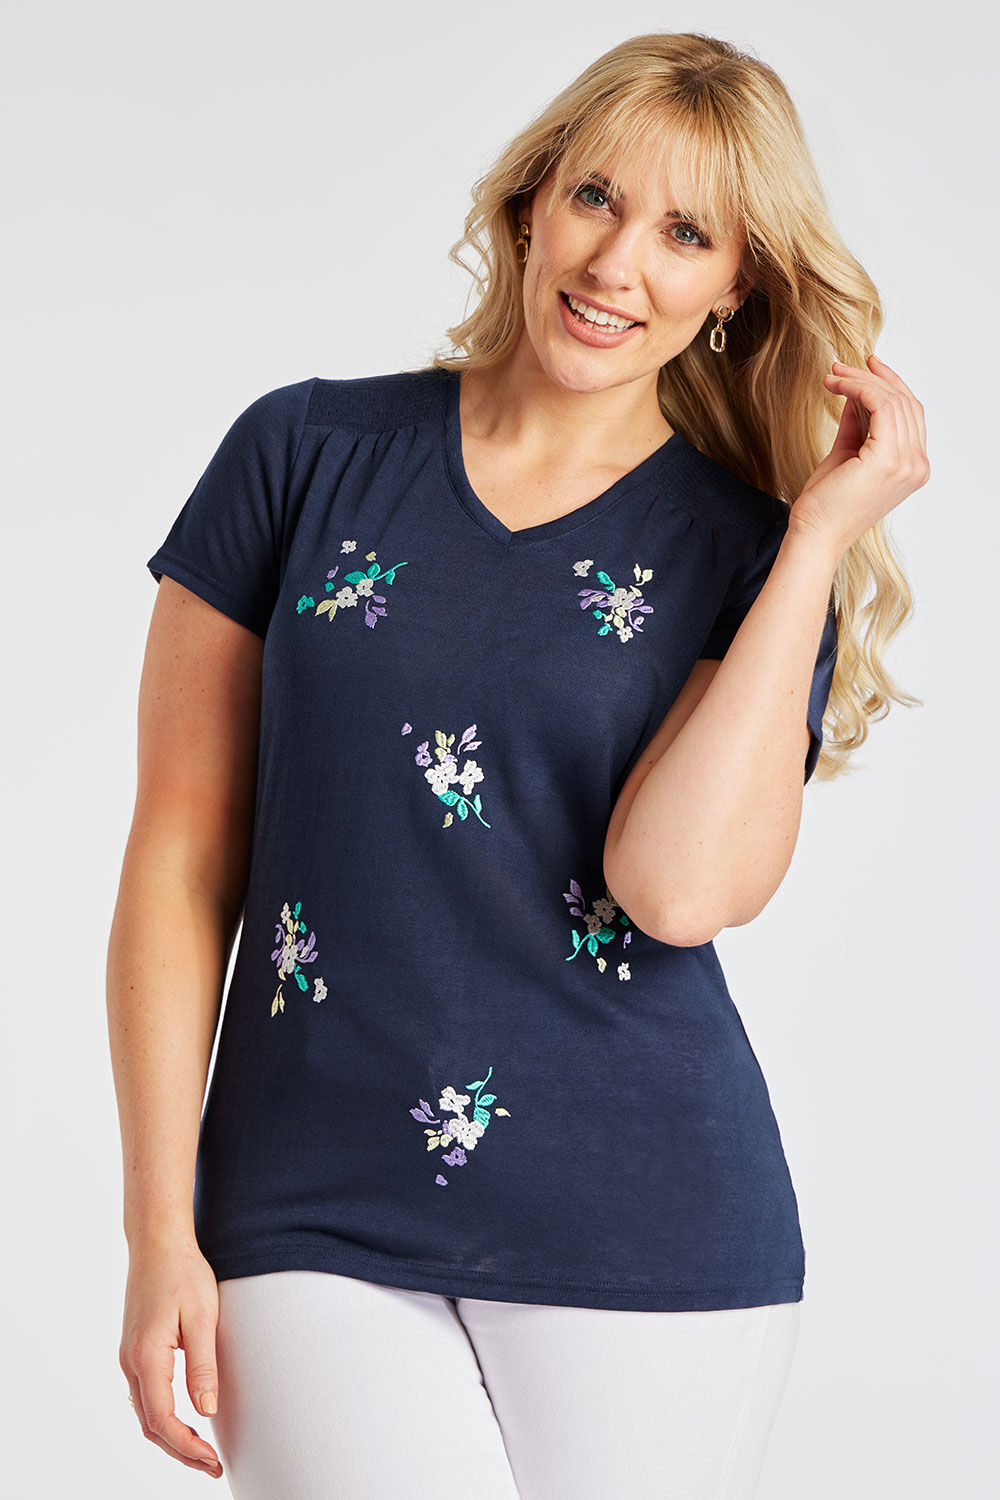 Bonmarche Navy Short Sleeves Embroidered Flower T-Shirt, Size: 20